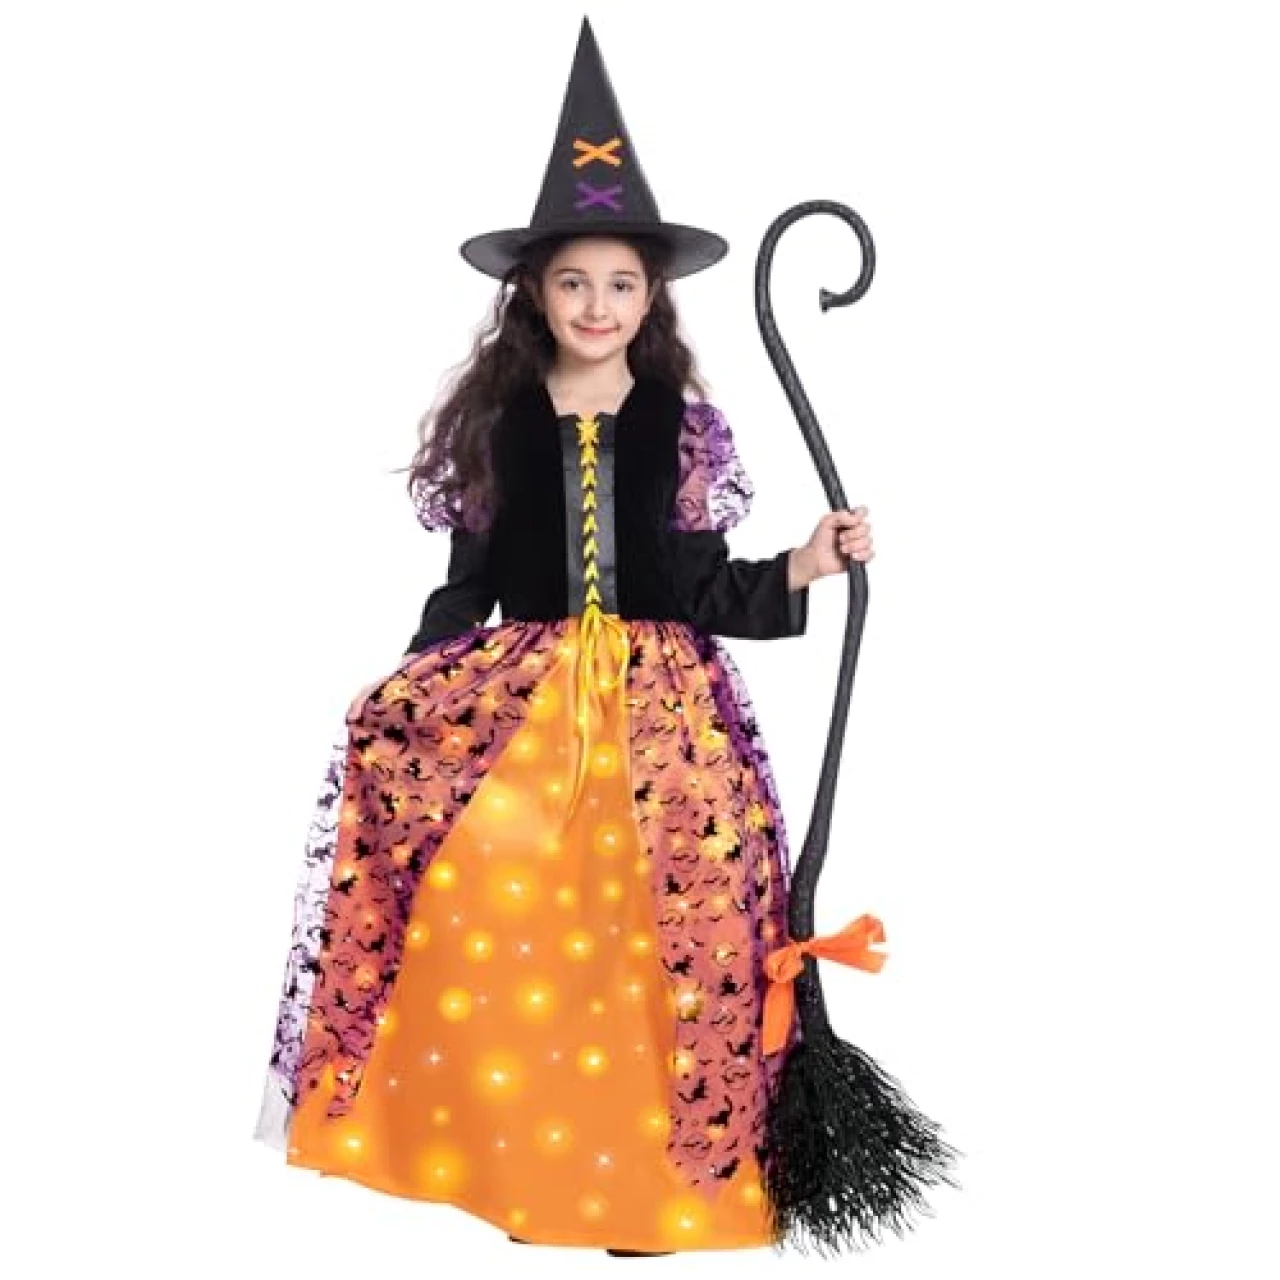 Witch Halloween Costume for Girls, Light Up Witch Dress Deluxe Outfit with Hat and Broom, Kids Twinkle Witch Costumes for Halloween Dress Up Party (Large)